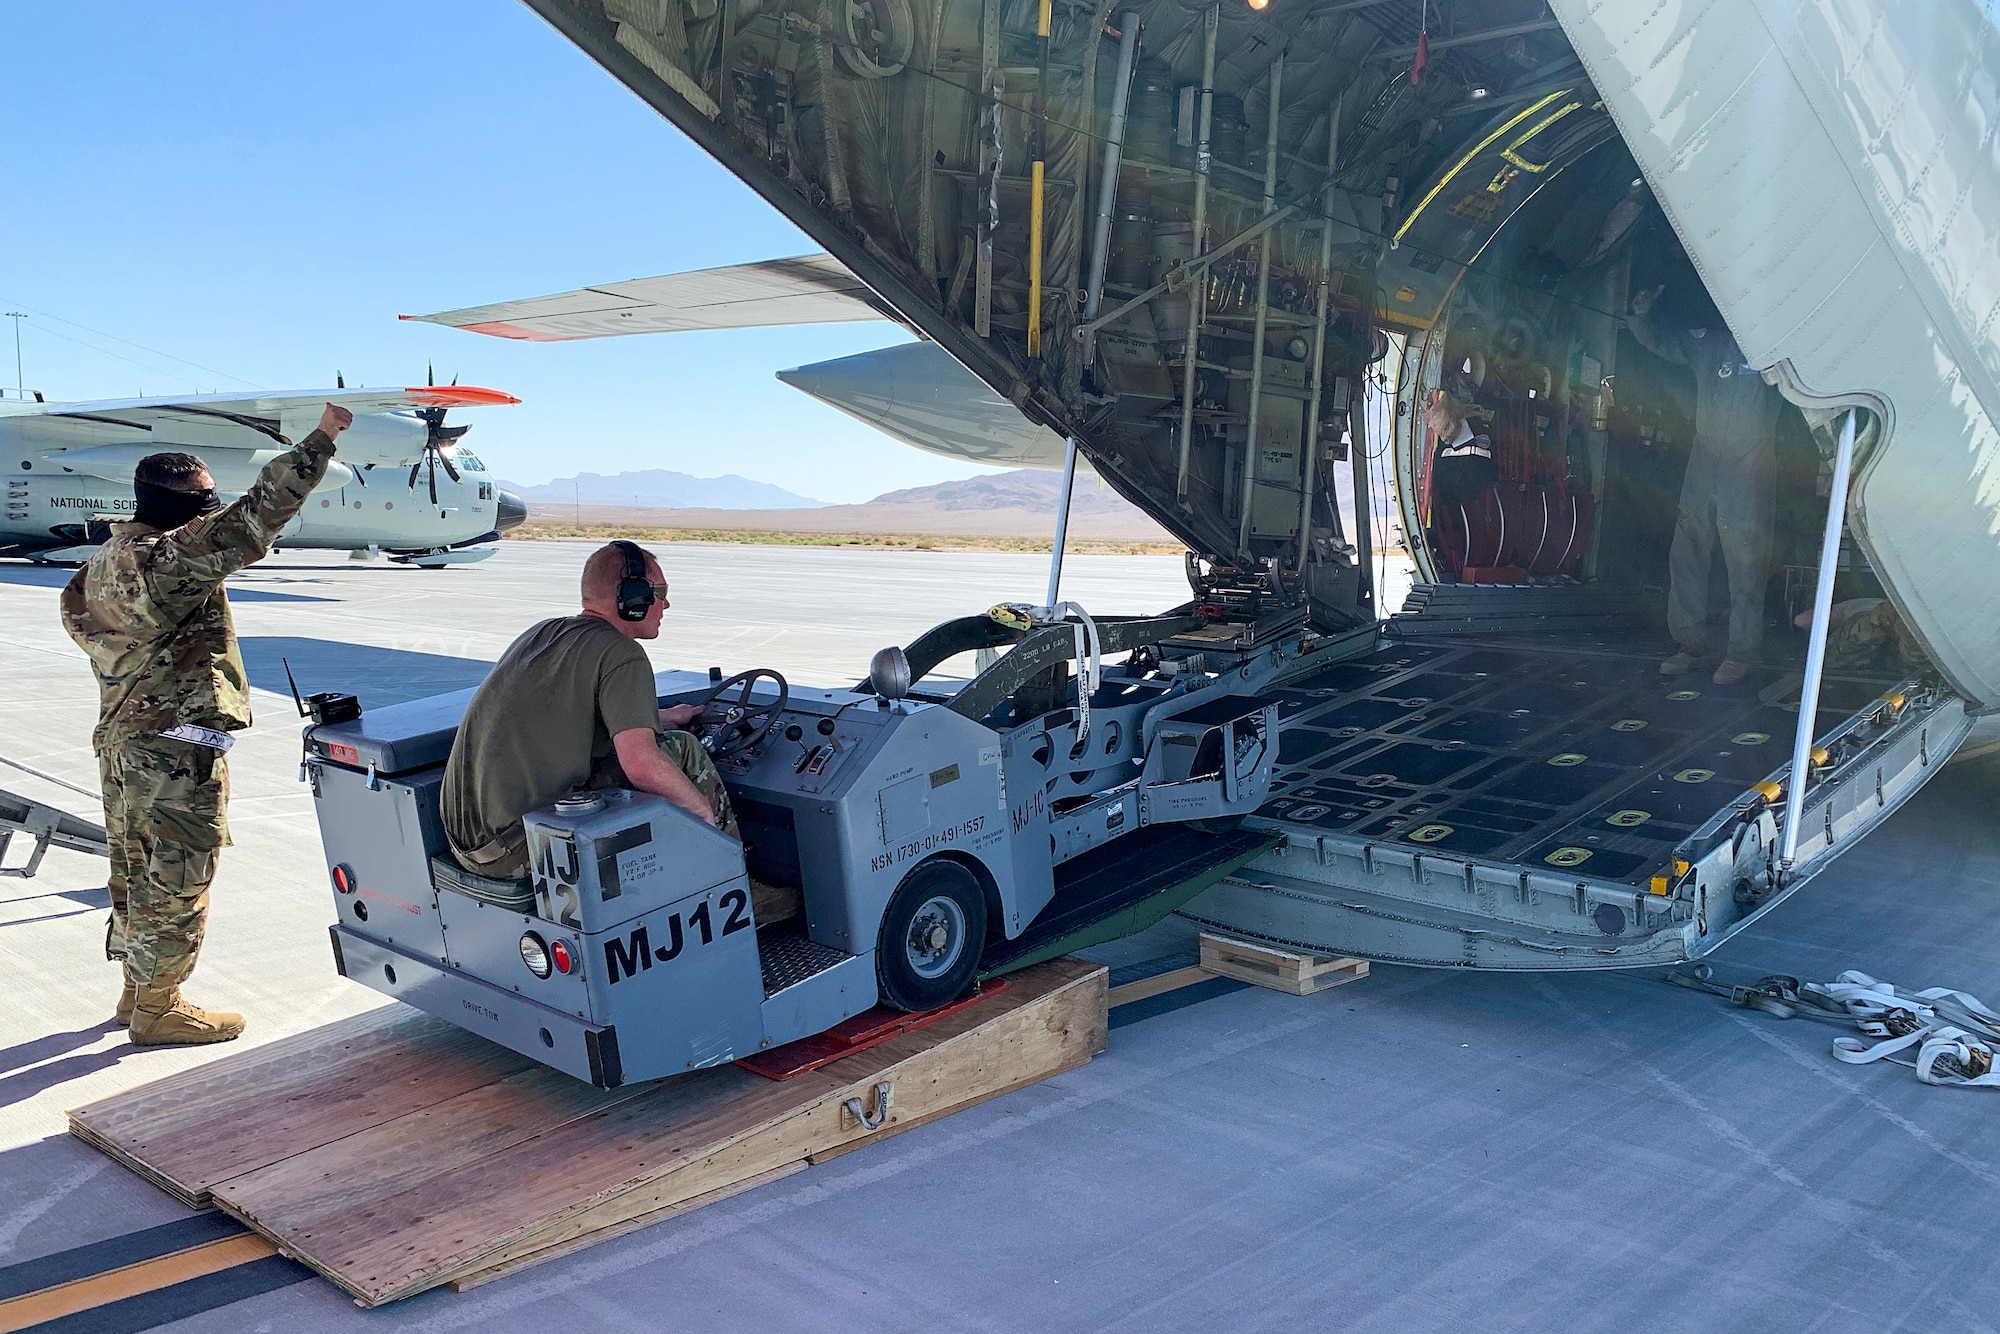 U.S. Air Force Airmen prepare to offload a weapon-loading jammer from a 109th Airlift Wing LC-130 Hercules aircraft Sept. 3, 2020, at Nellis Air Force Base, Nevada. Airmen are offloading cargo from the C-130 to prepare for an Integrated Combat Turn, which is the rapid re-arming and refueling of an aircraft. (Courtesy photo)